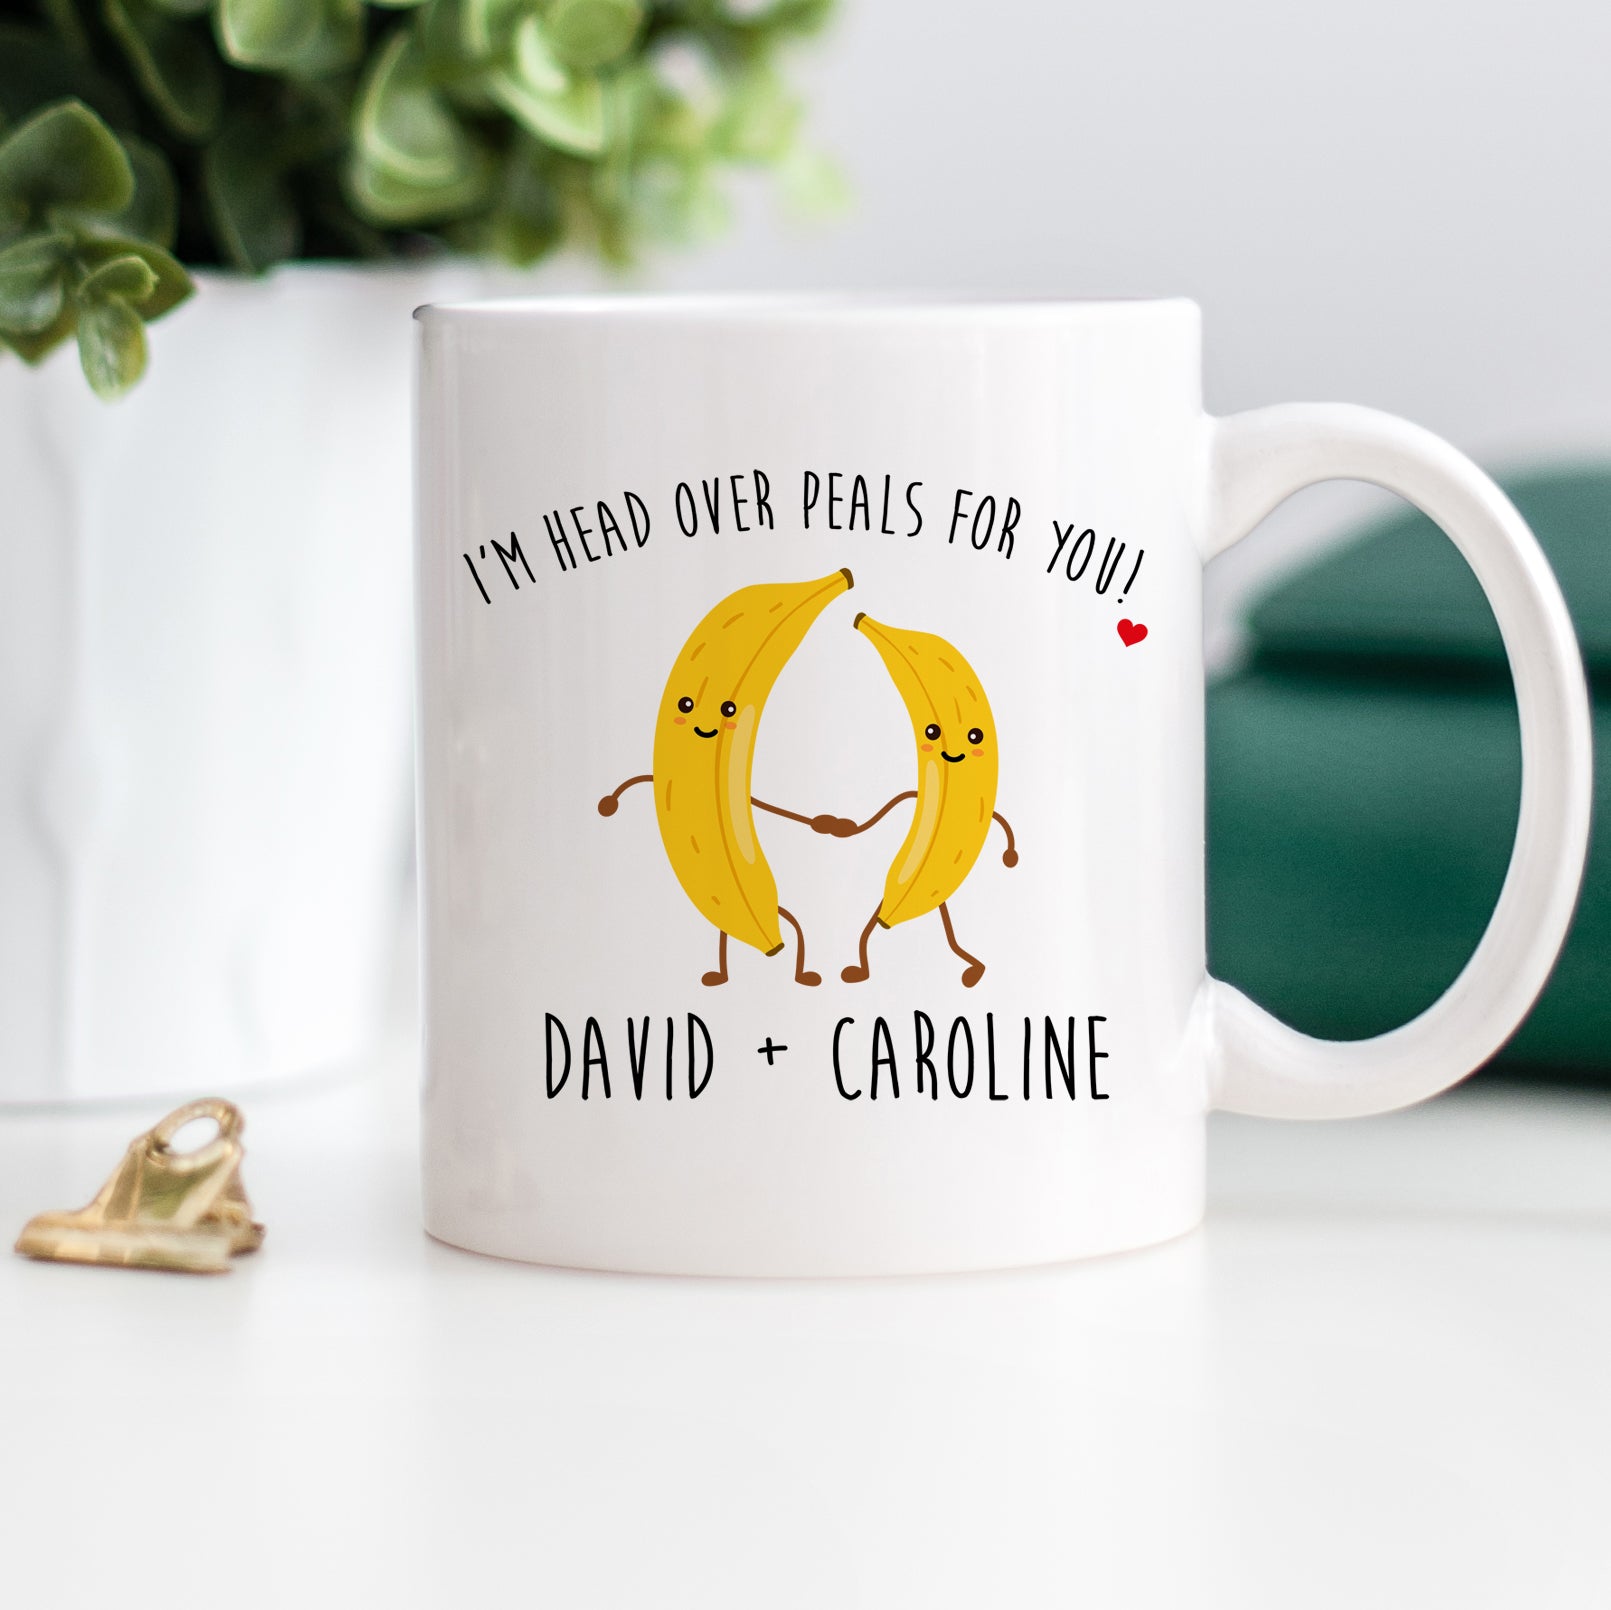 Banana Couples Mug, I'm head over PEALS for you, followed by the couple's names, PIPSY.COM